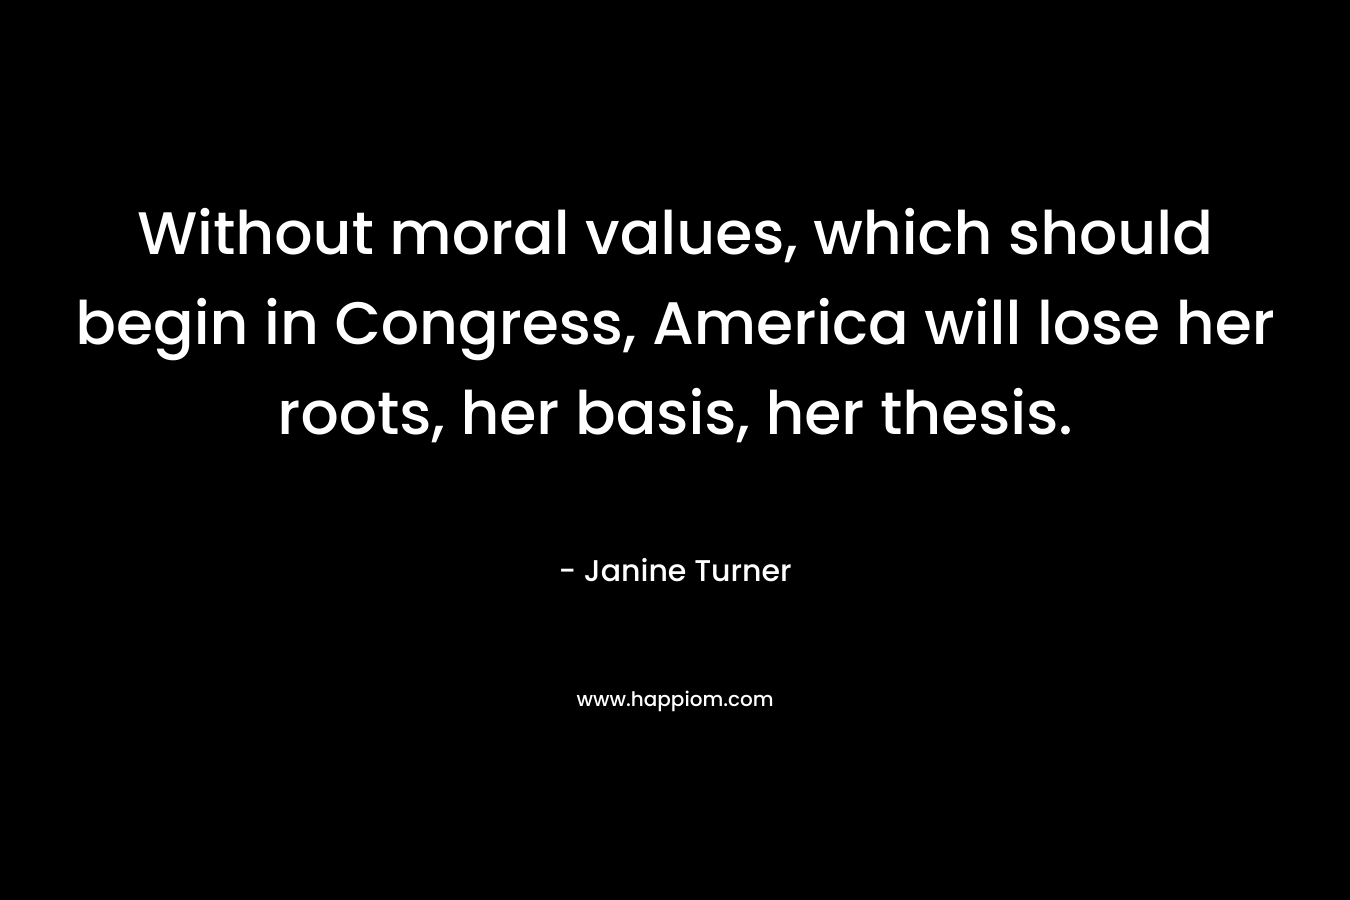 Without moral values, which should begin in Congress, America will lose her roots, her basis, her thesis.